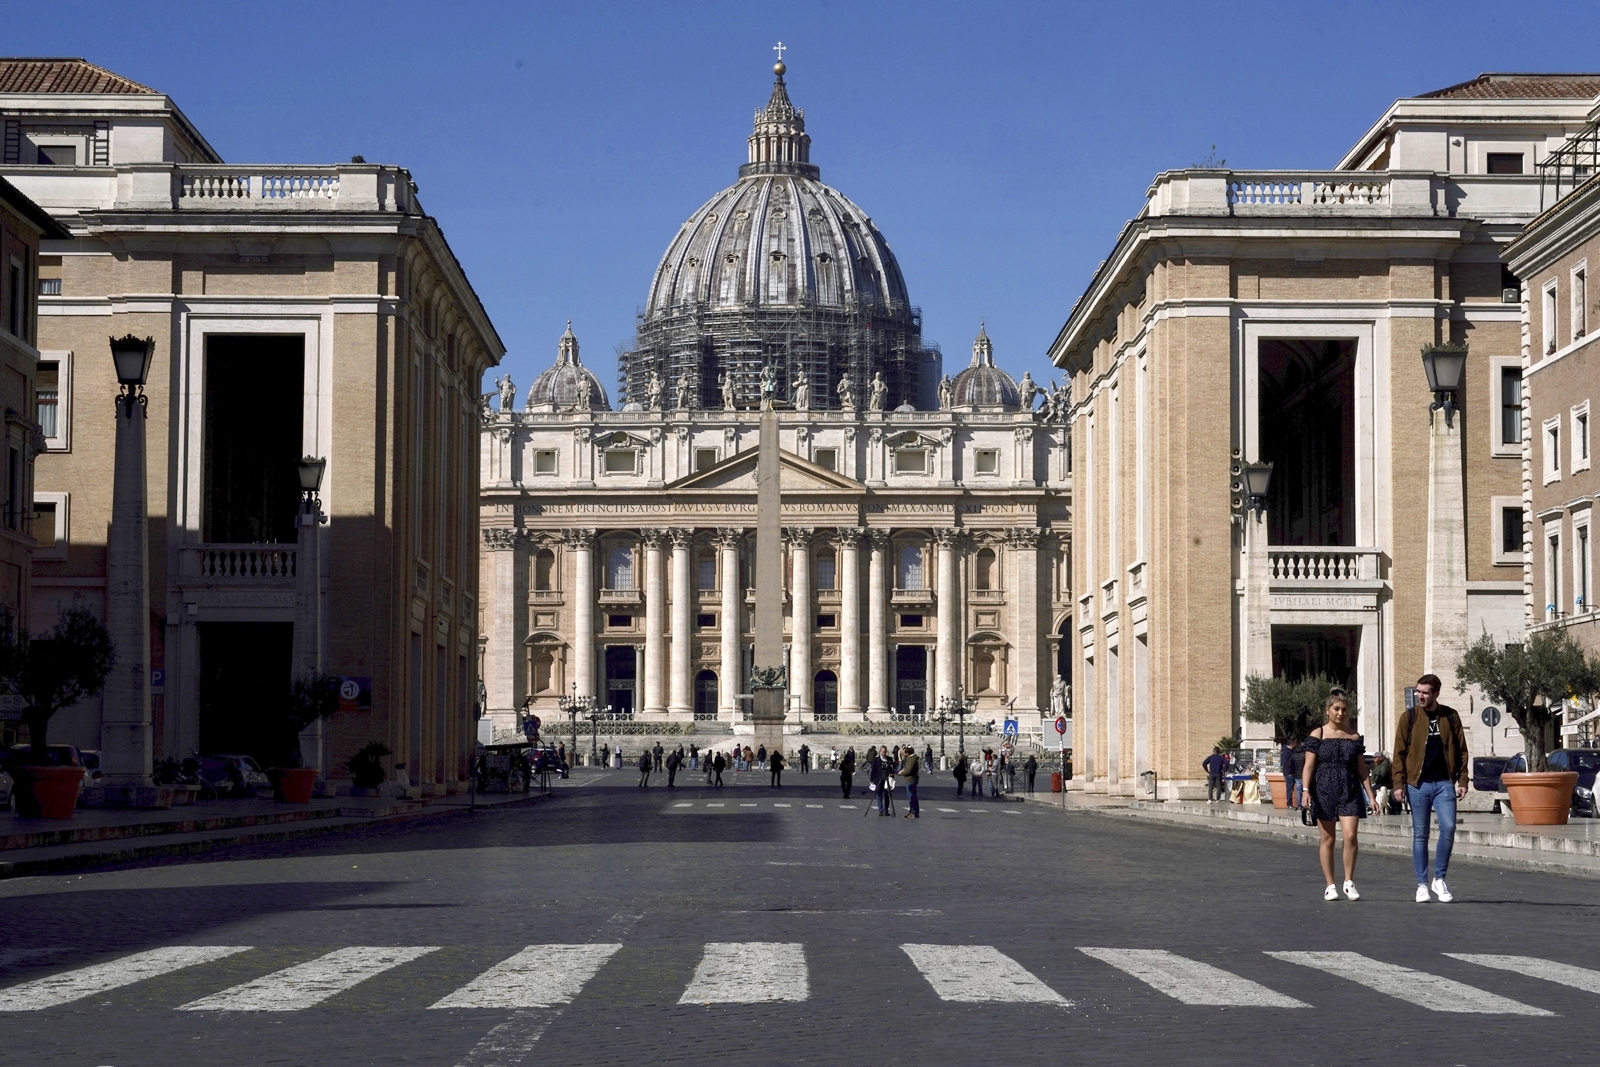 A View Of St. Peter'S Basilica At The Vatican, March 11, 2020. In The United States, The National Conference Of Catholic Bishops Rejects The Concept Of Gender Transition, Leaving Many Transgender Catholics Feeling Excluded. On Wednesday, Nov. 8, 2023, The Vatican Made Public A Sharply Contrasting Statement, Saying It’s Permissible, Under Certain Circumstances, For Trans Catholics To Be Baptized And Serve As Godparents. (Ap Photo/Andrew Medichini, File)